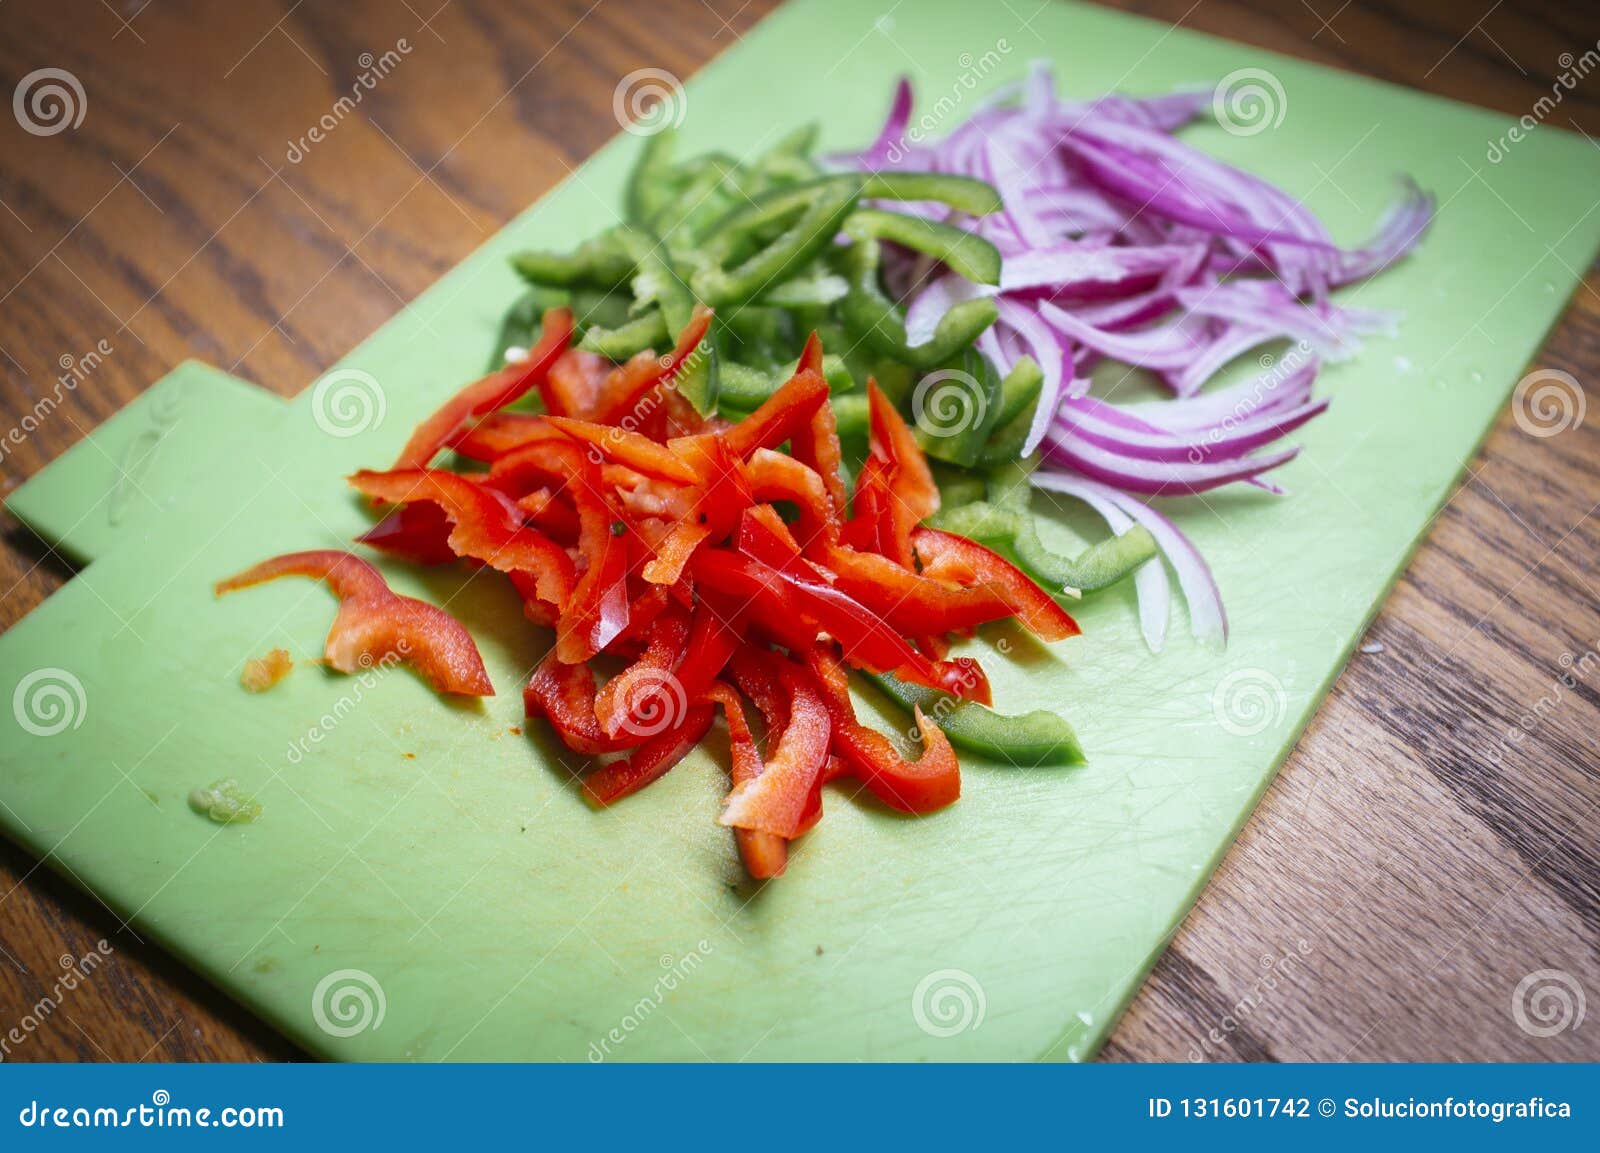 chopped vegetables on kitchen table, preparing salad